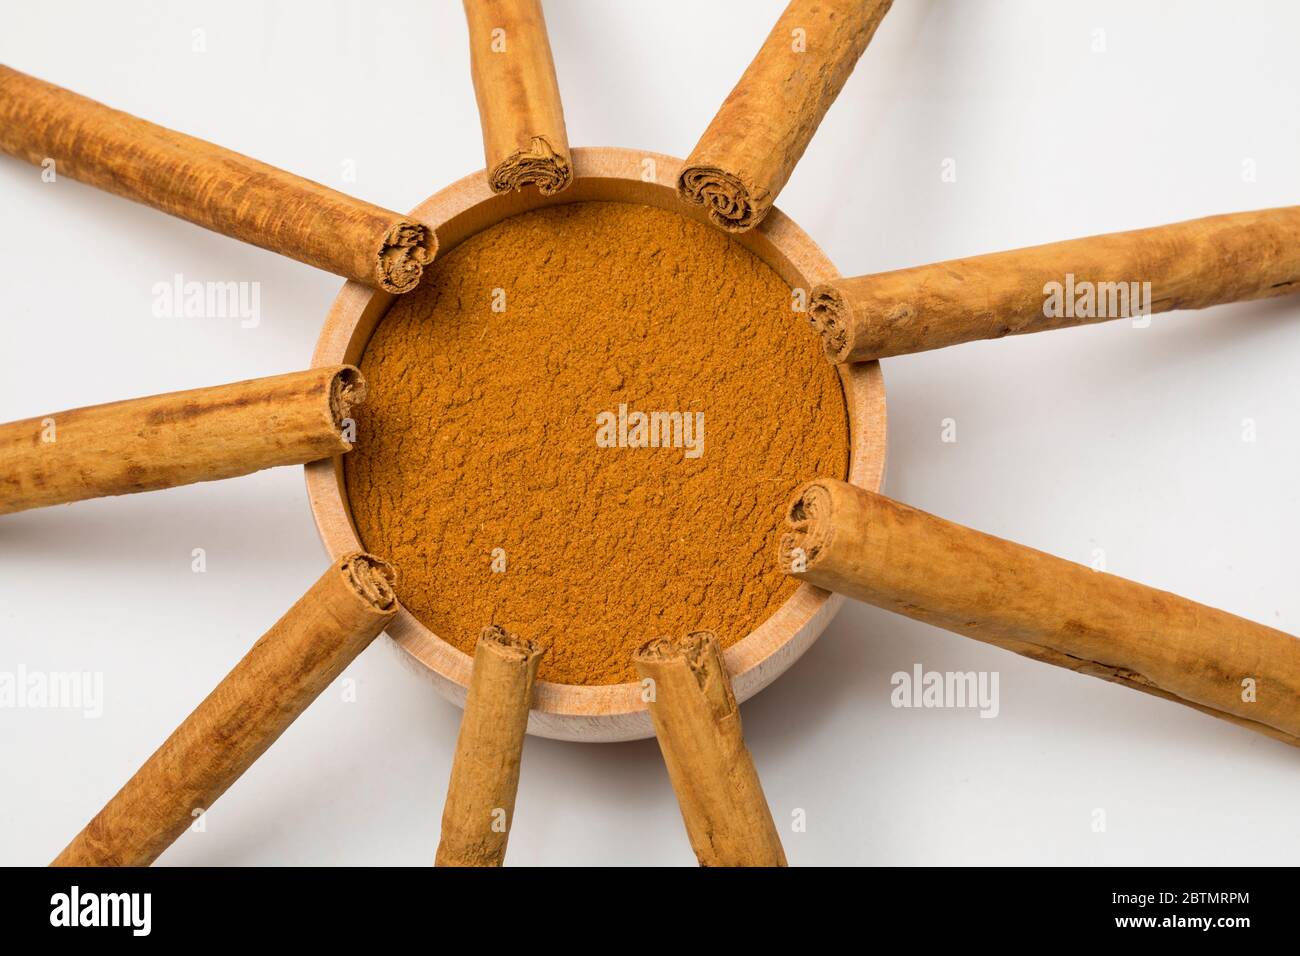 Close-up view of cinnamon sticks and powder on white background. Stock Photo